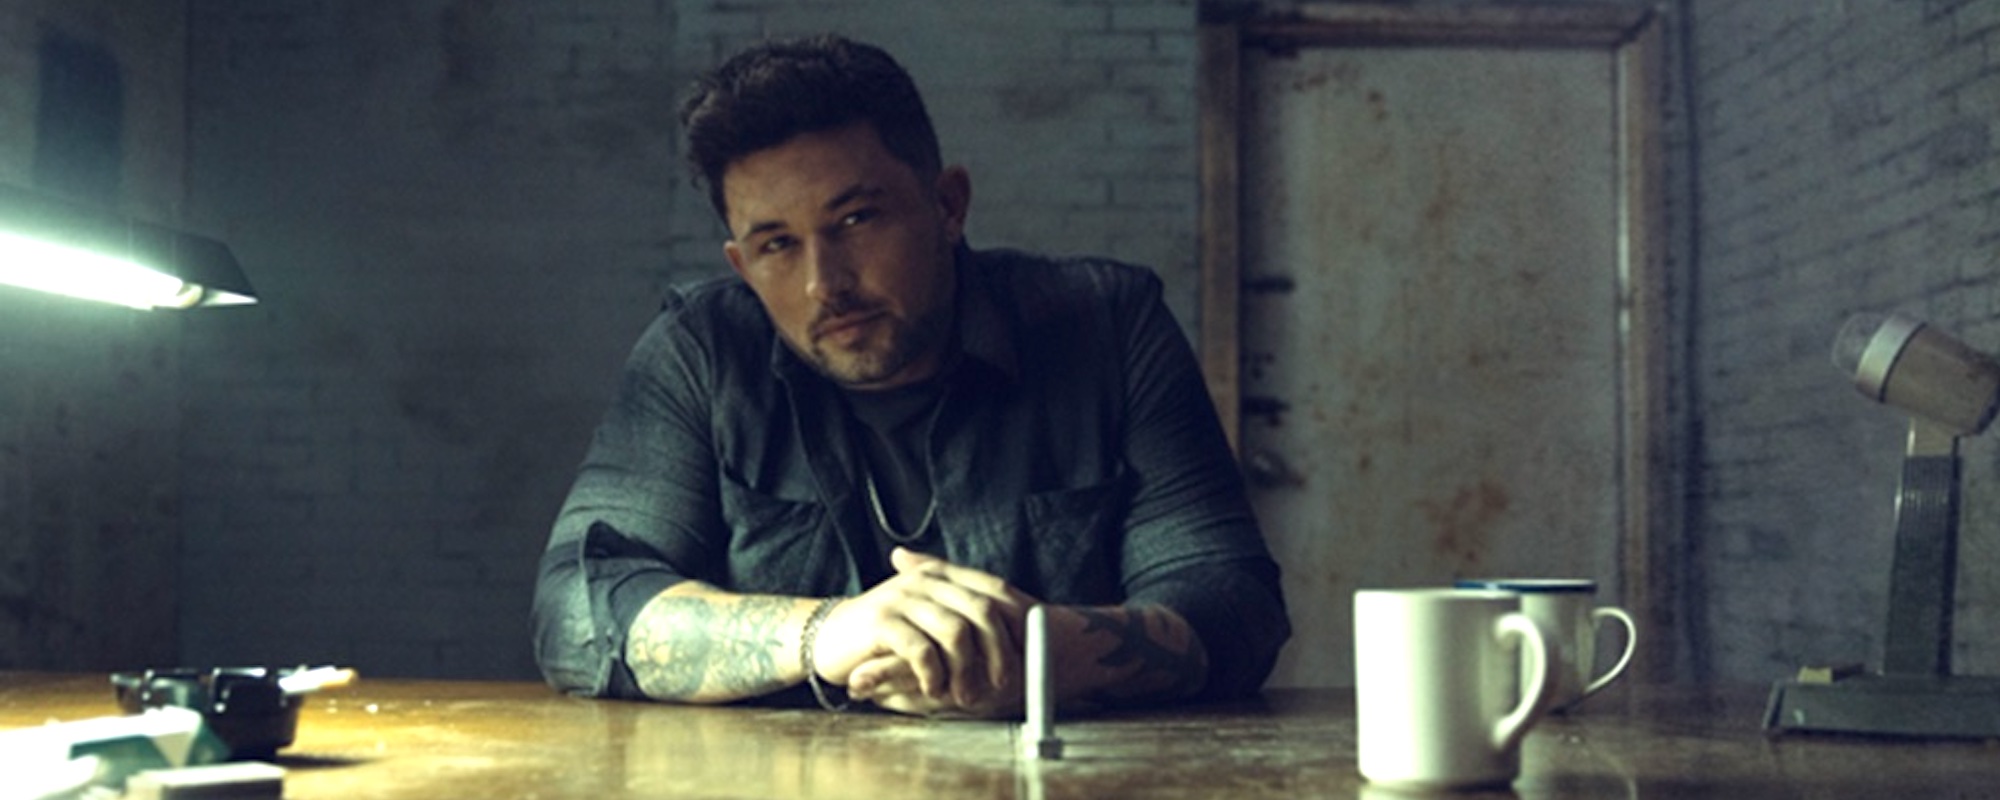 Michael Ray Sings Song of Revenge to Carly Pearce Look-Alike in “Get Her Back” Video